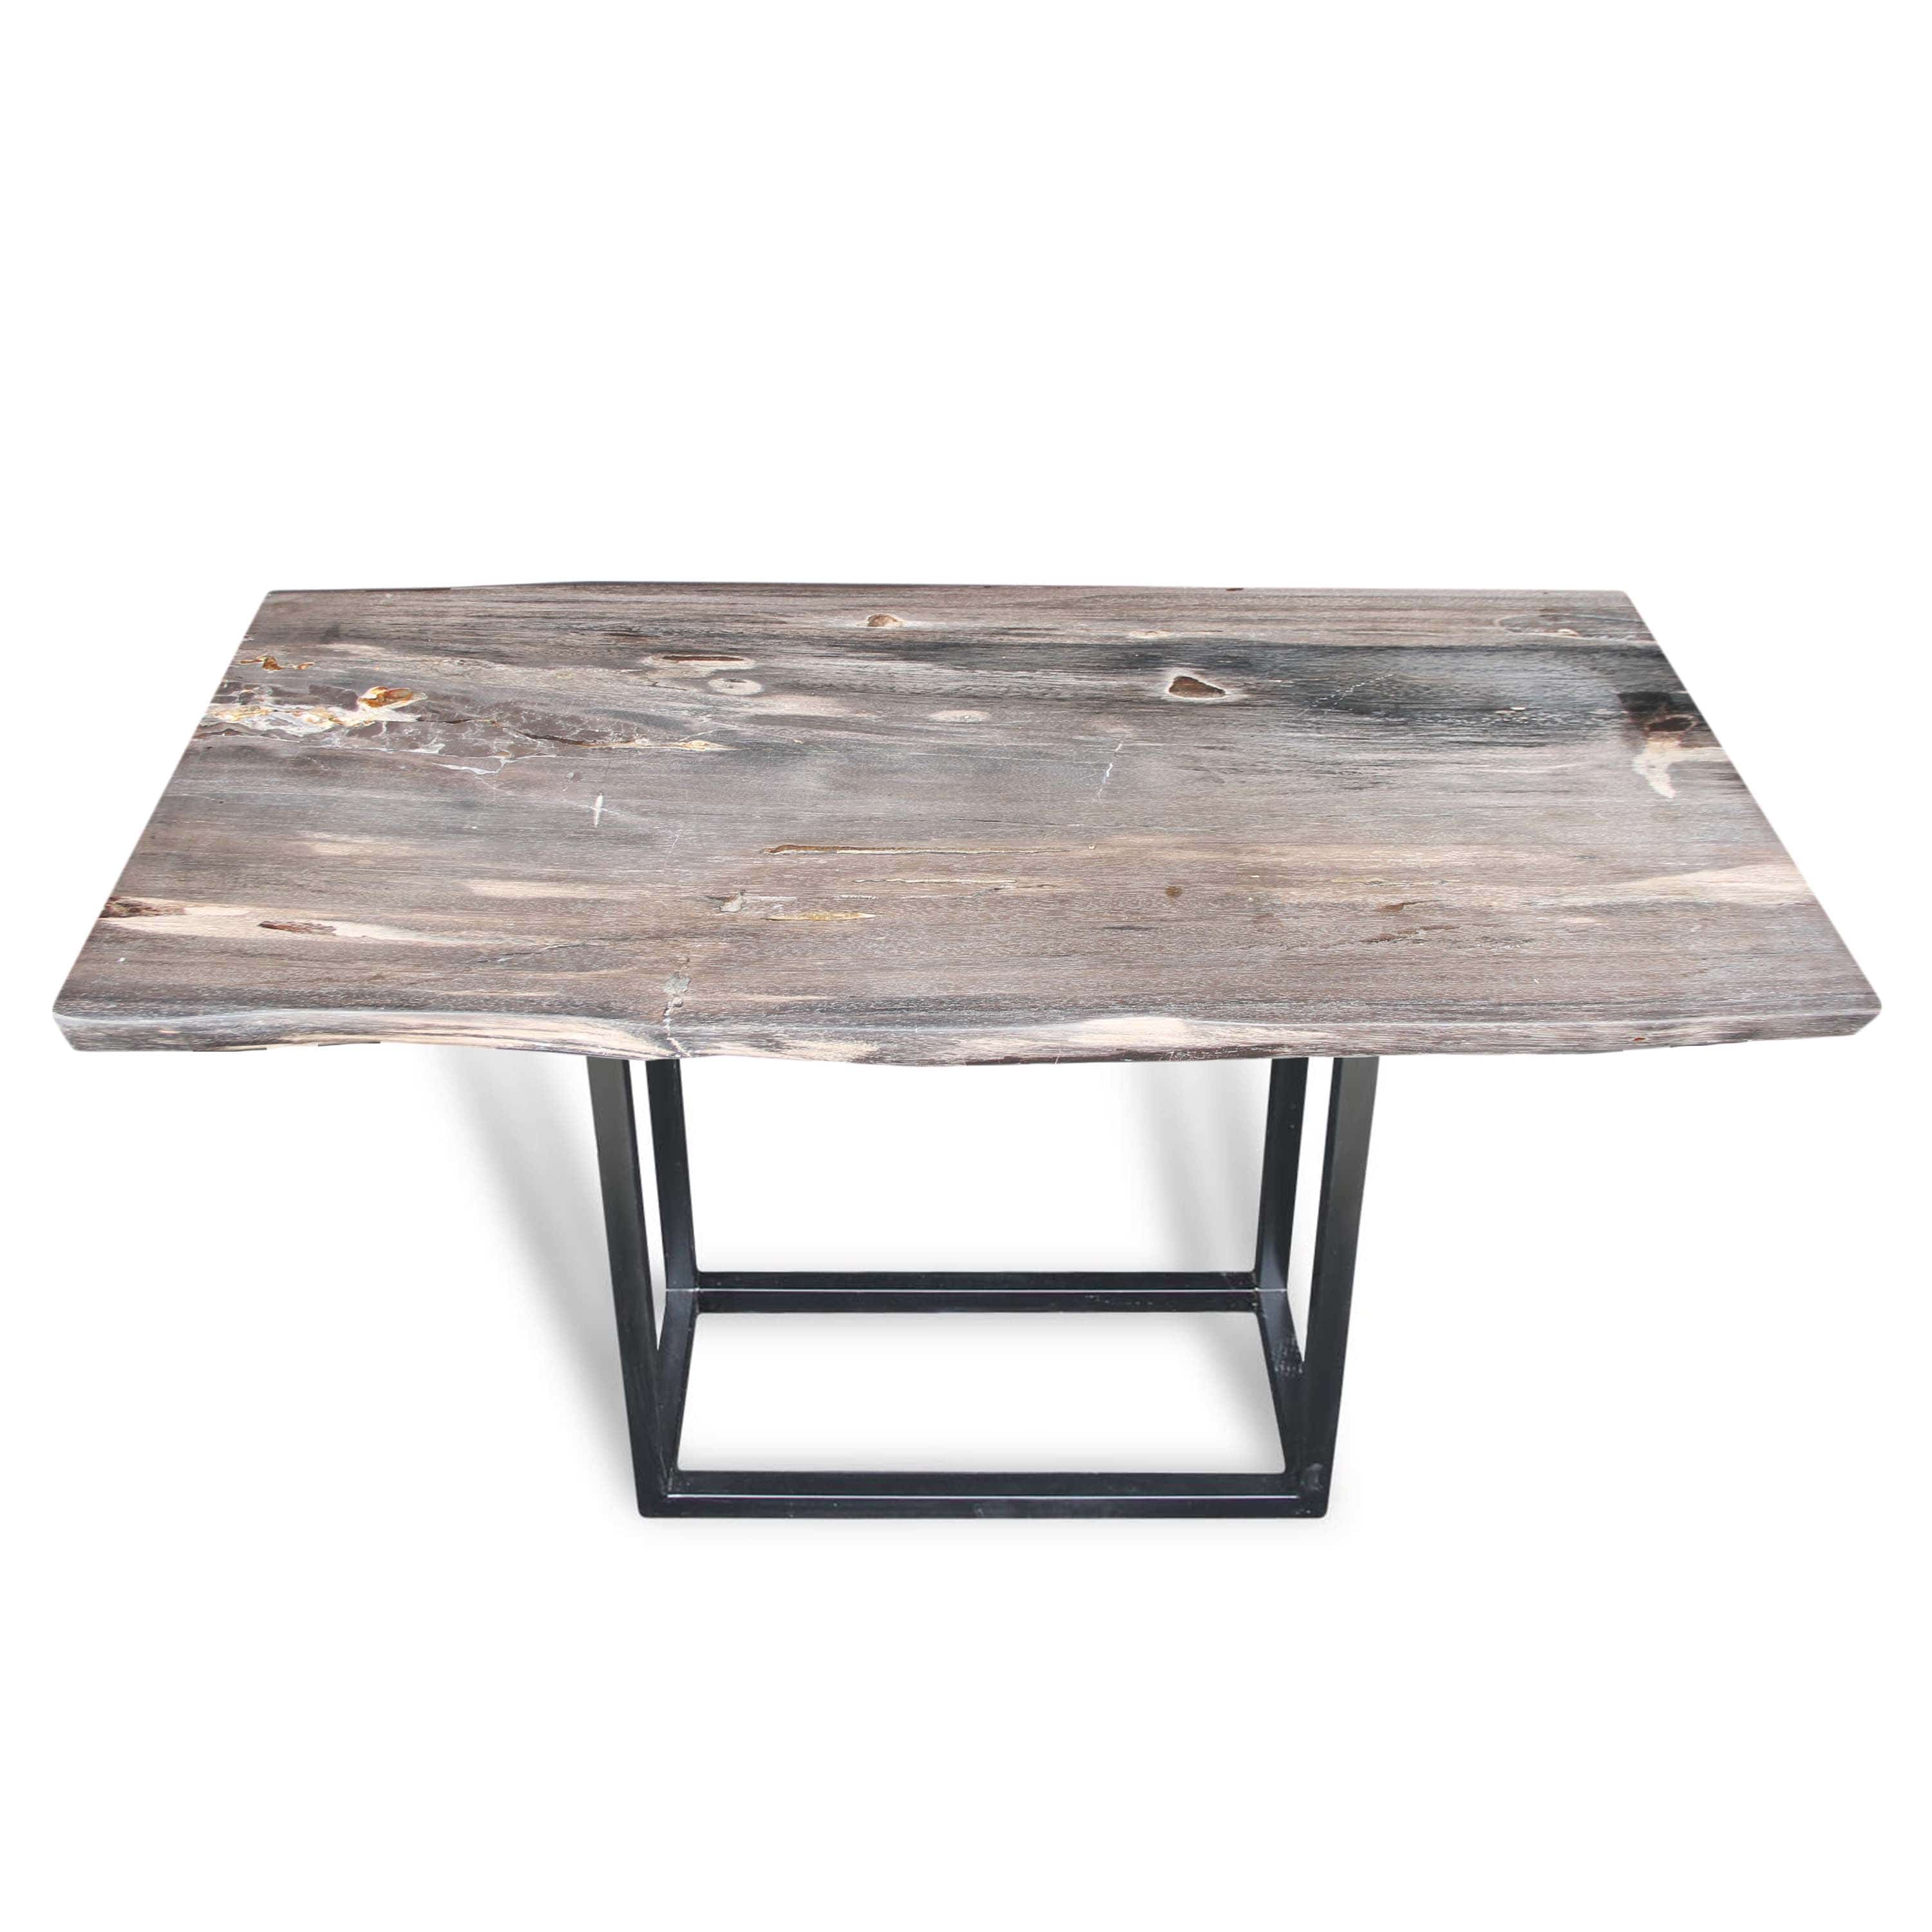 Kalifano Petrified Wood Natural Polished Petrified Wood Console Table from Indonesia - 47" / 146 lbs PWR7900.001